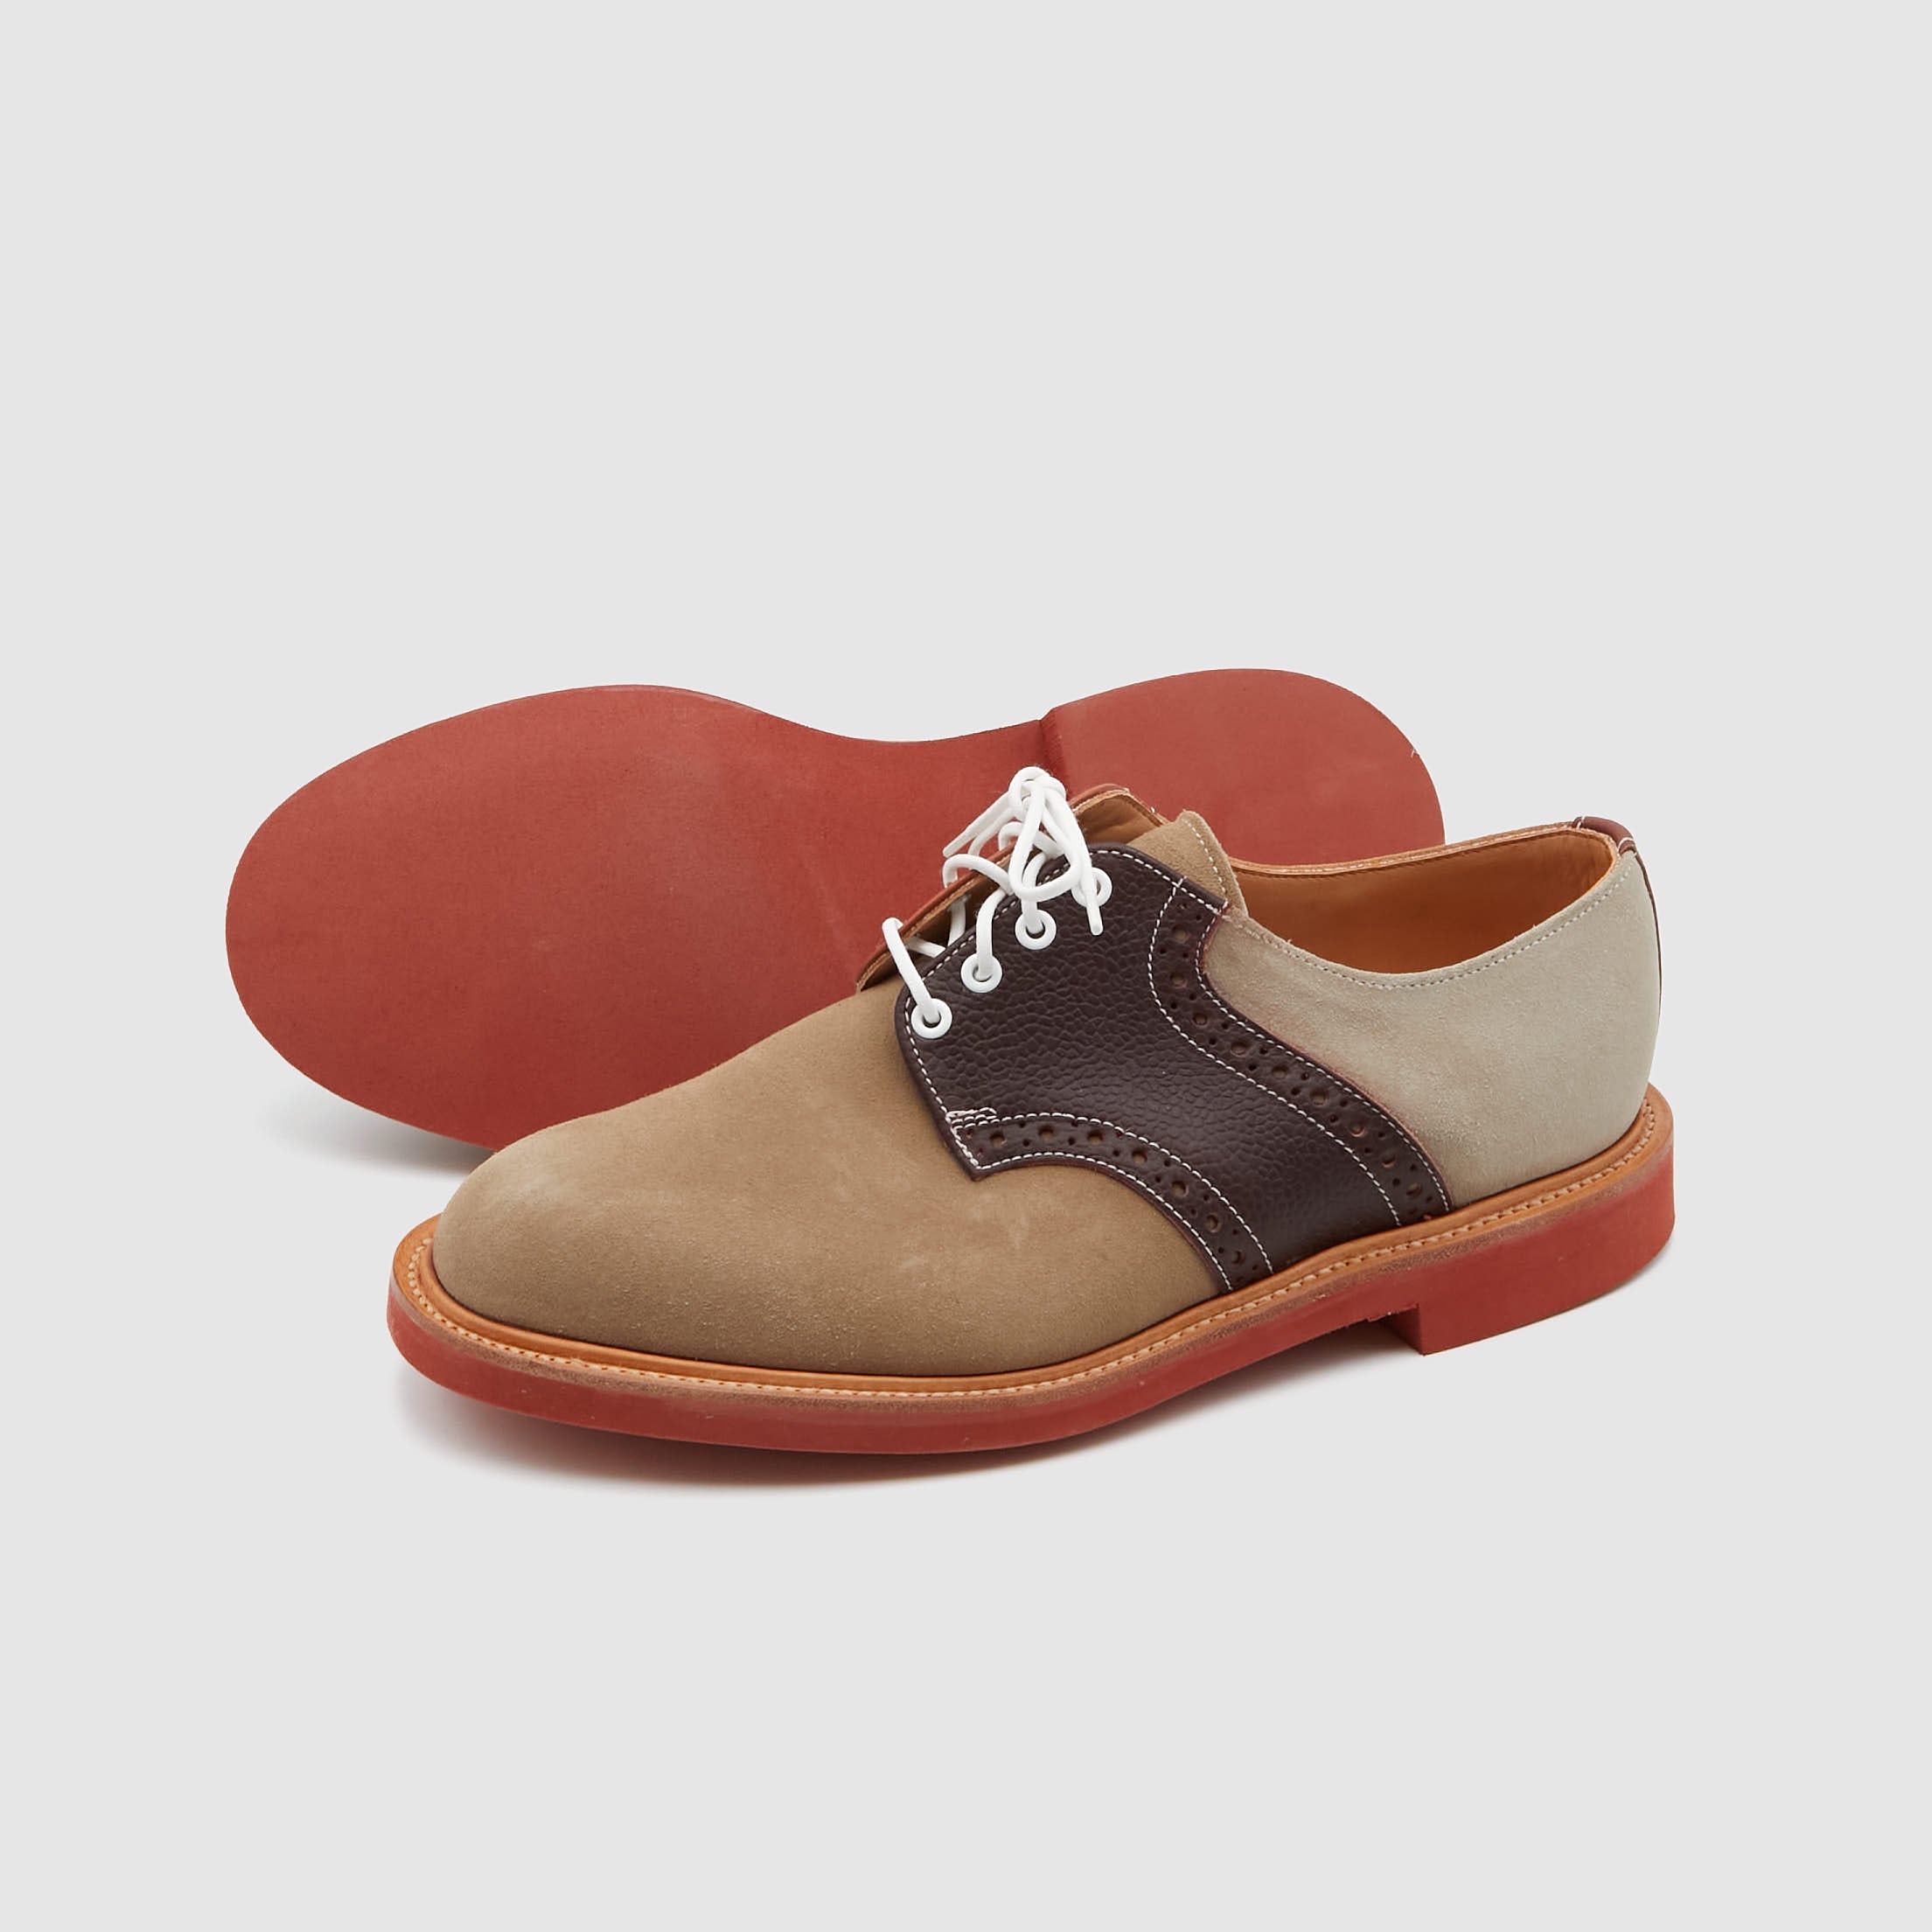 Mark McNairy Multi Section Derby Shoes - DeeCee style